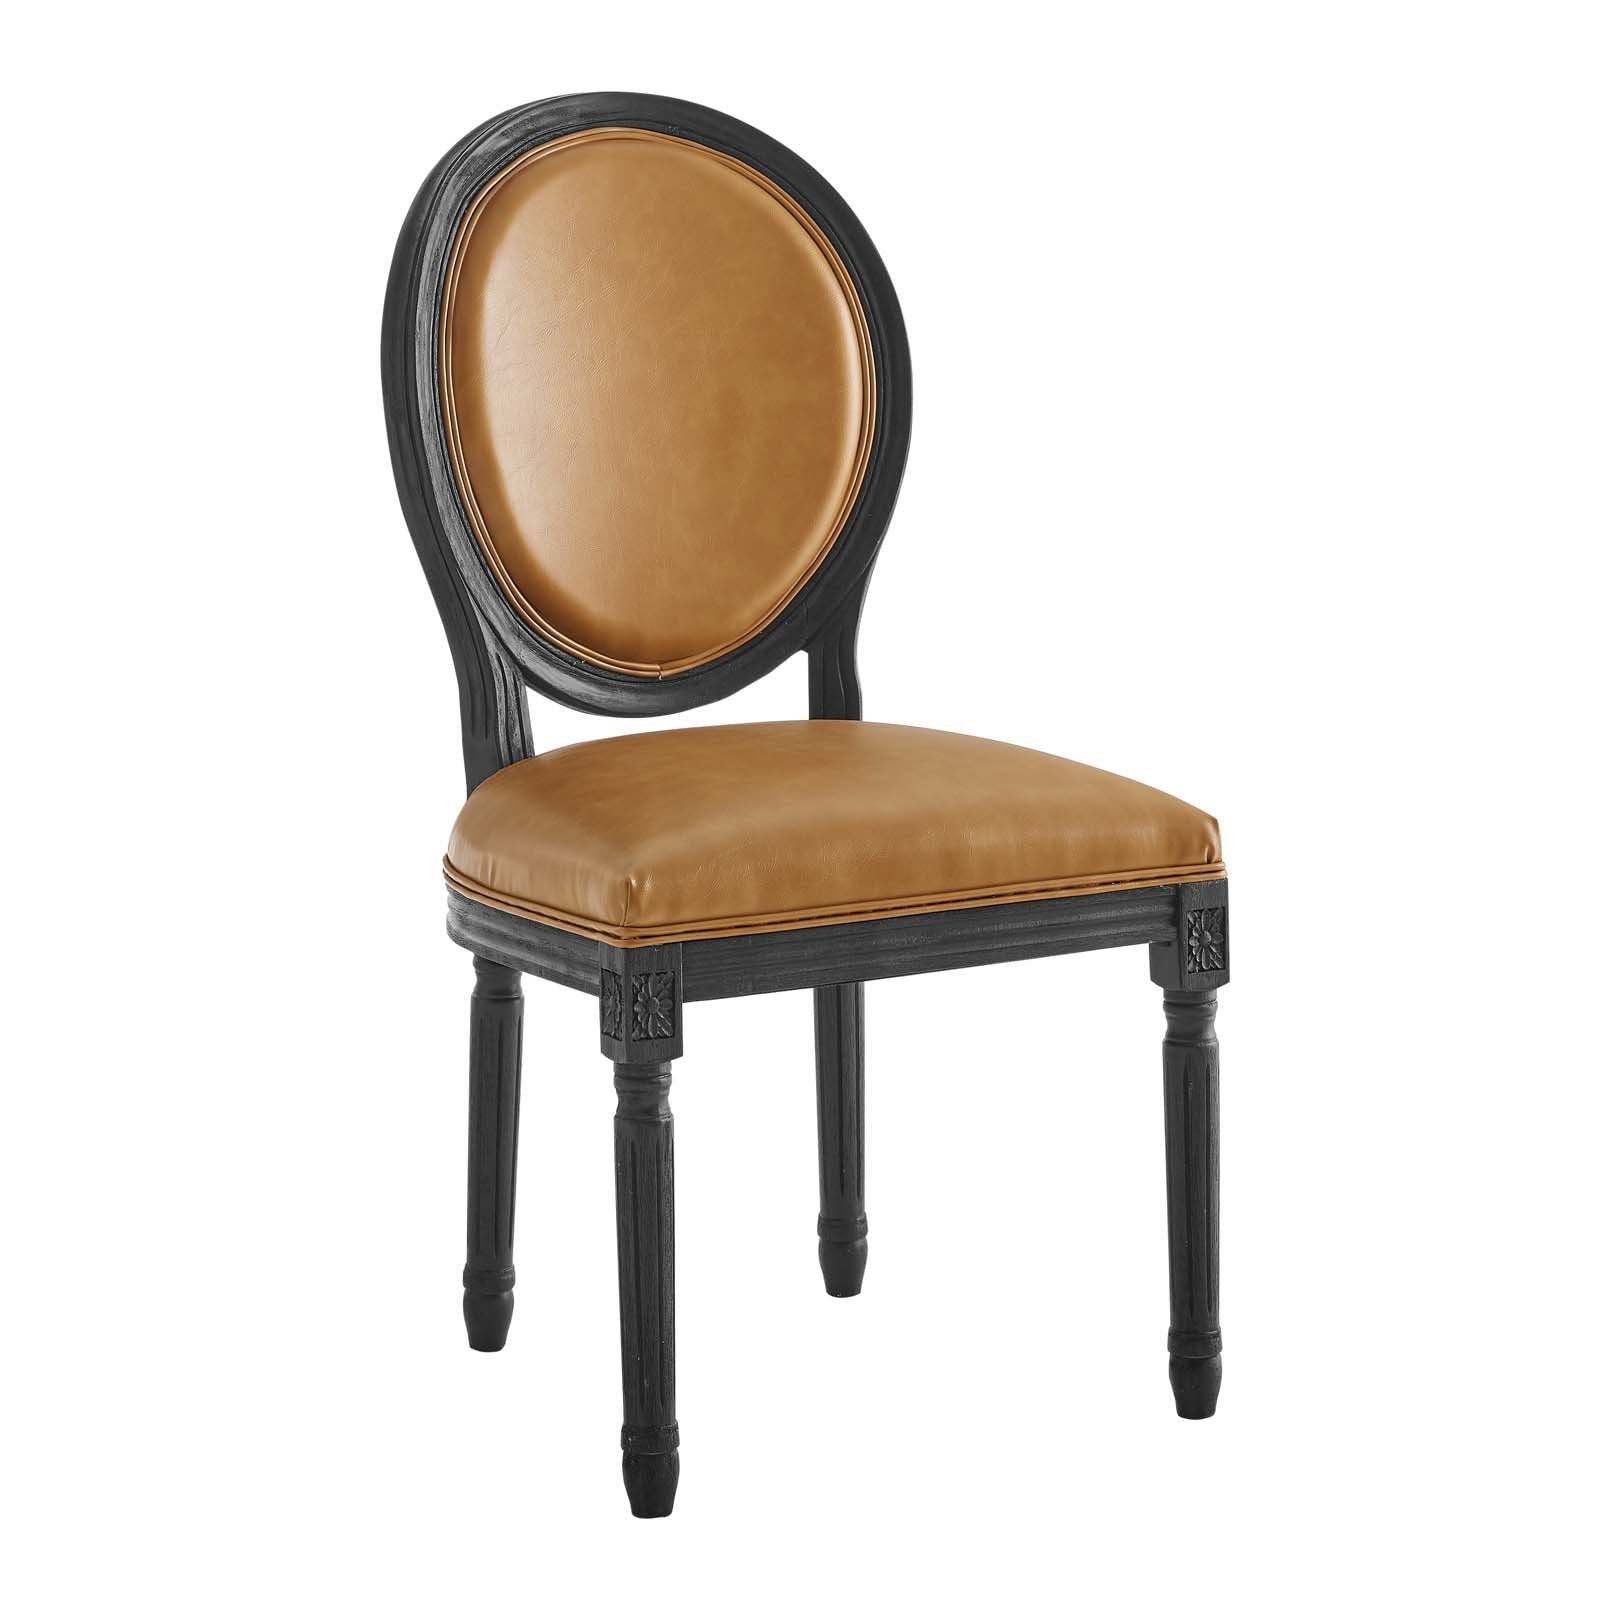 Emanate Vintage French Vegan Leather Dining Side Chair - East Shore Modern Home Furnishings